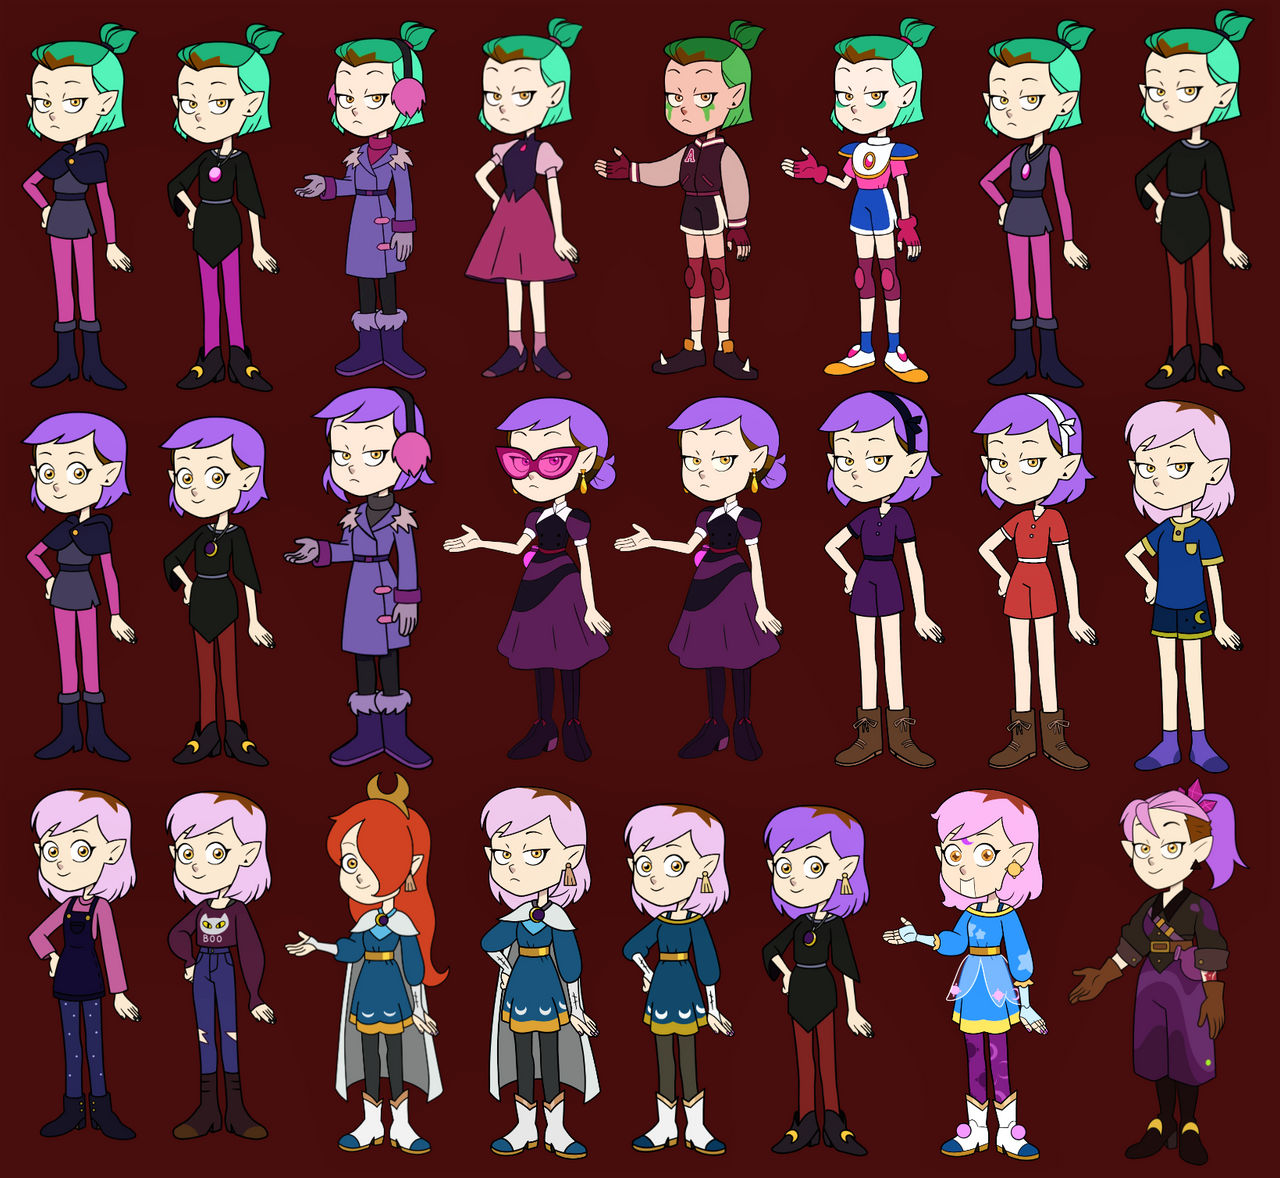 The Owl House Amity Blight Character Designs by MMMarconi127 on DeviantArt